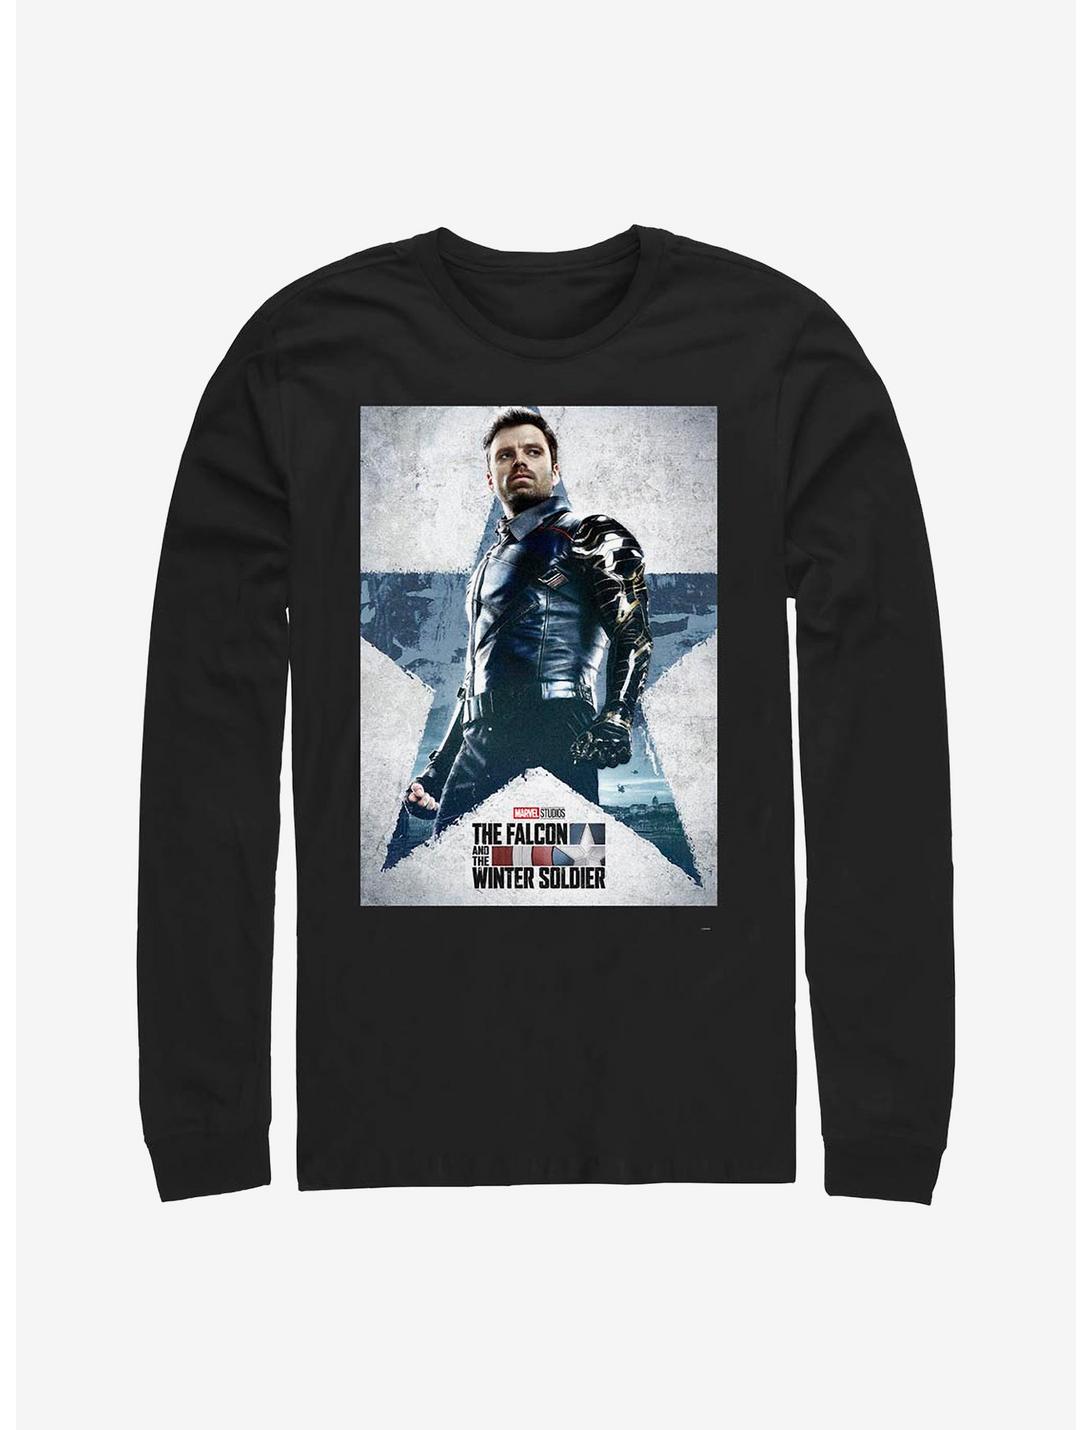 Marvel The Falcon And The Winter Soldier Poster Long-Sleeve T-Shirt, BLACK, hi-res